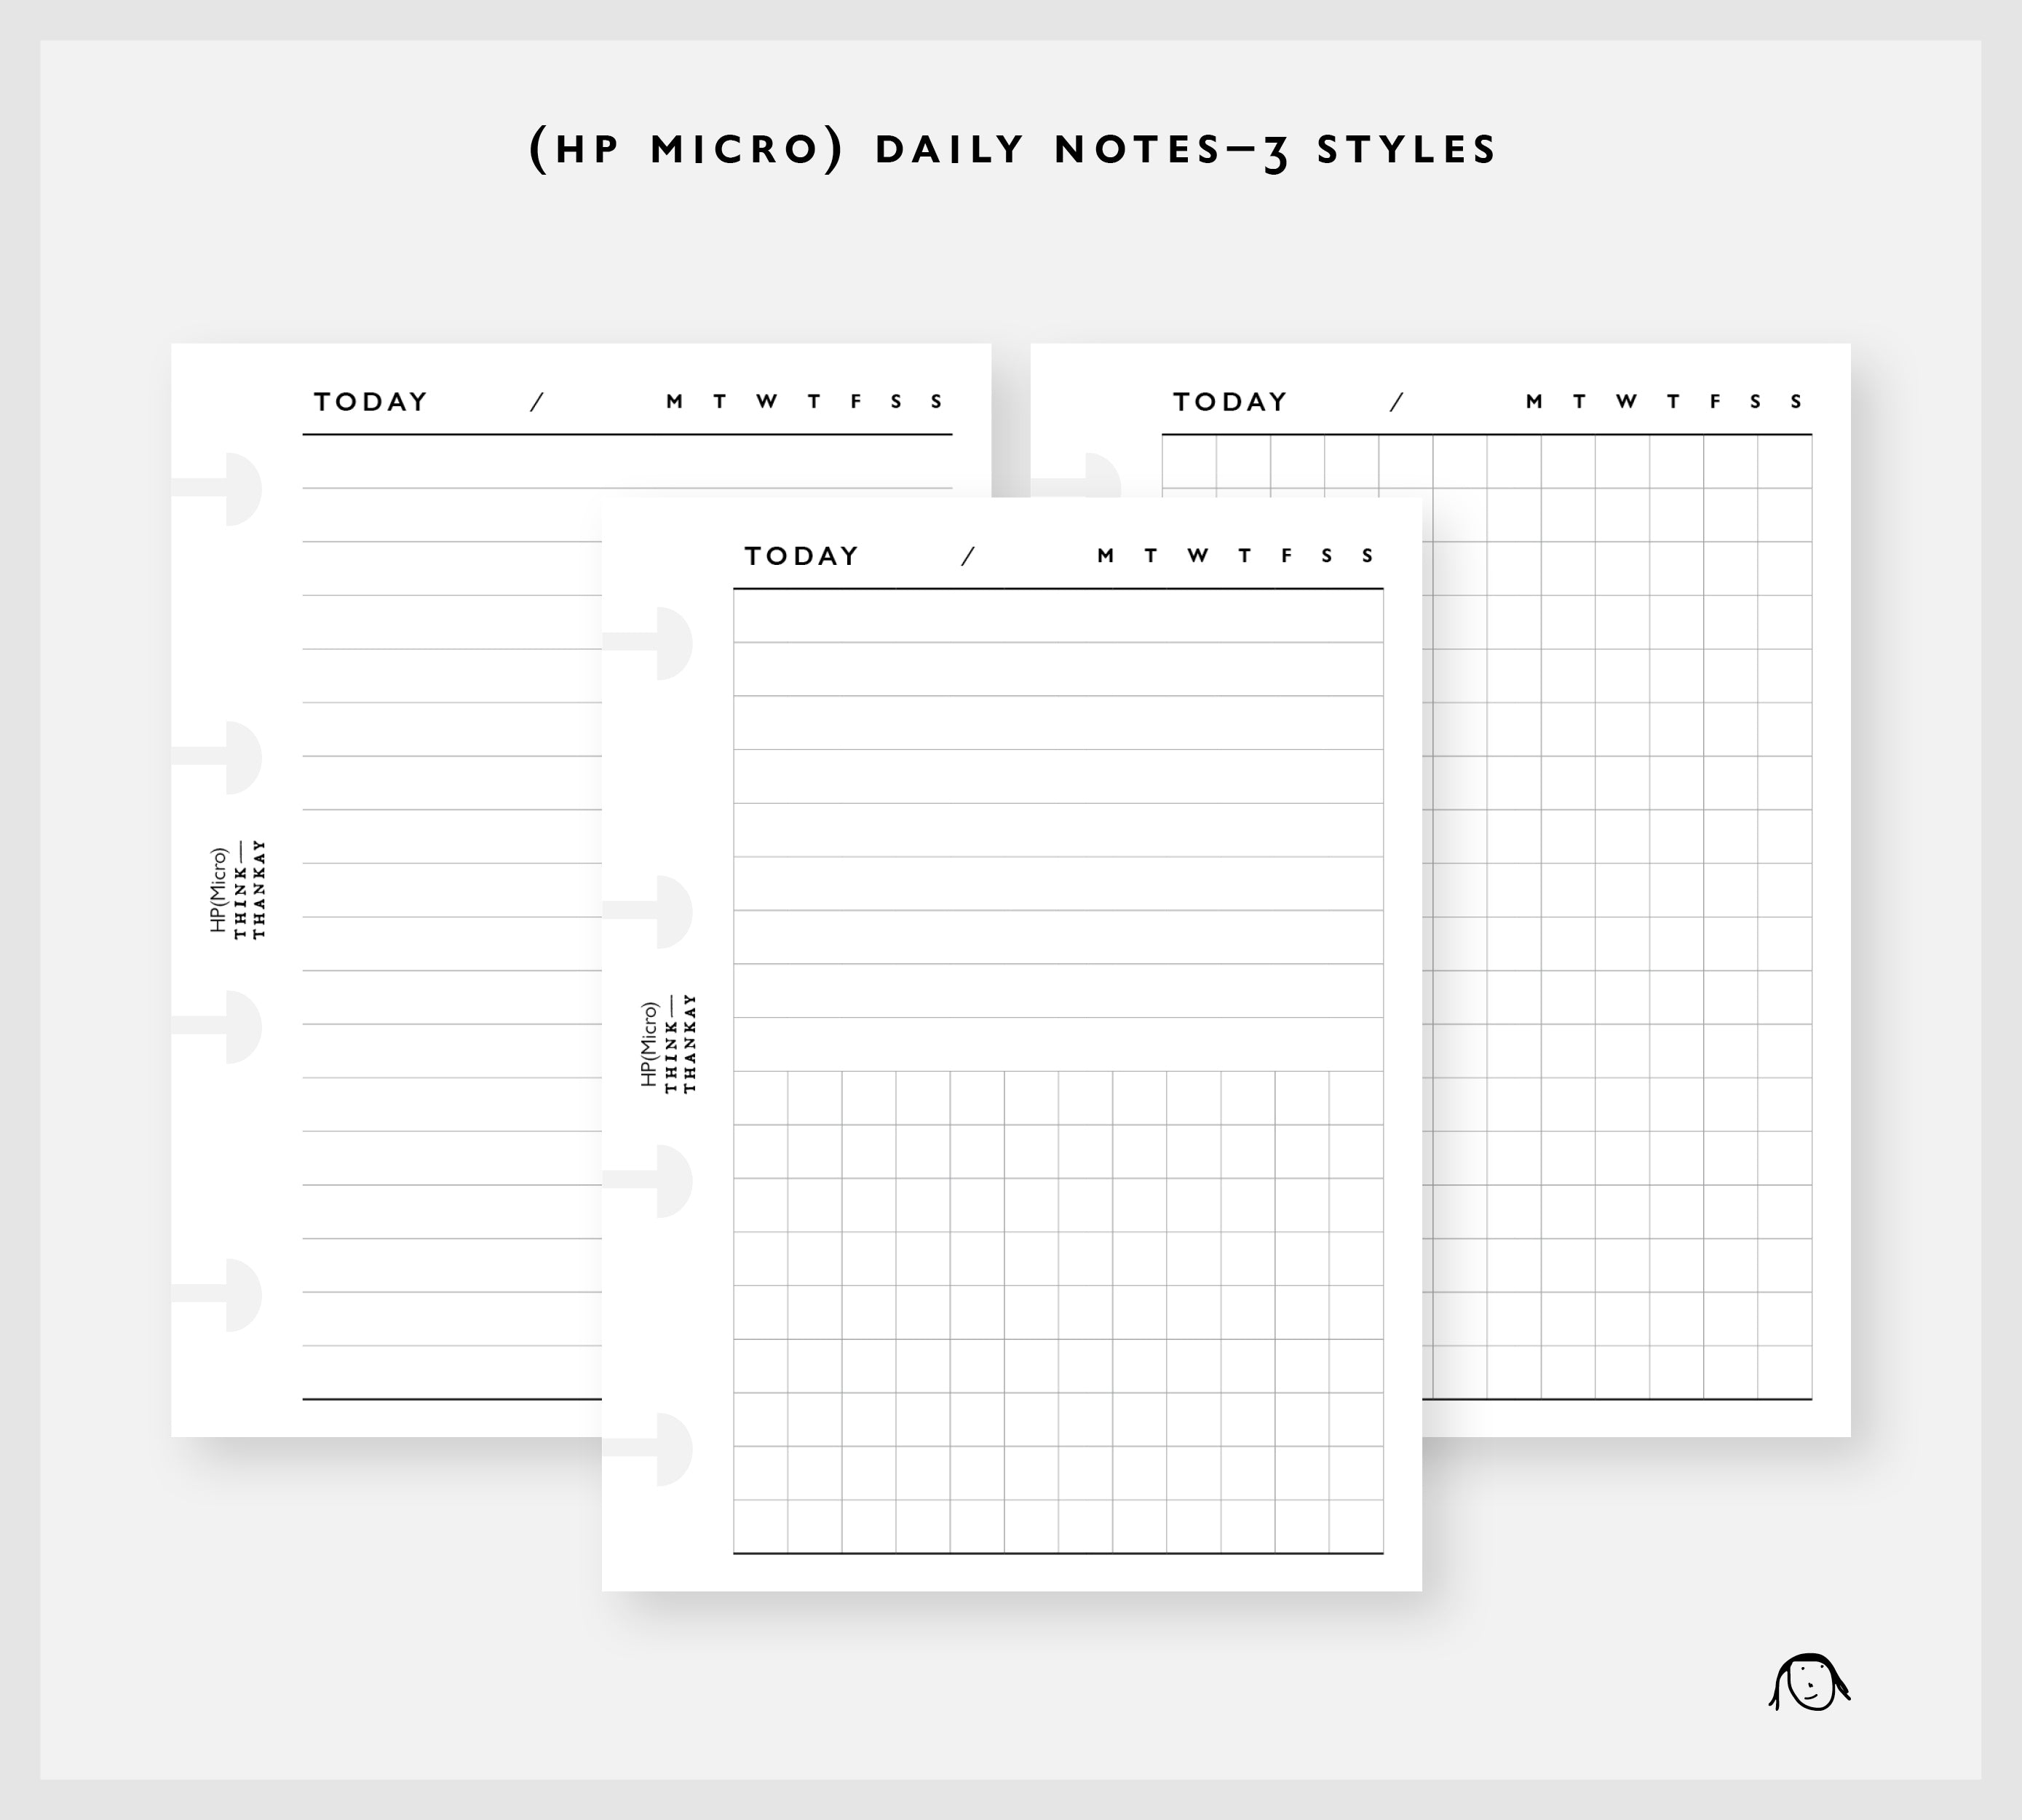 D3: Daily Notes – 3 Styles